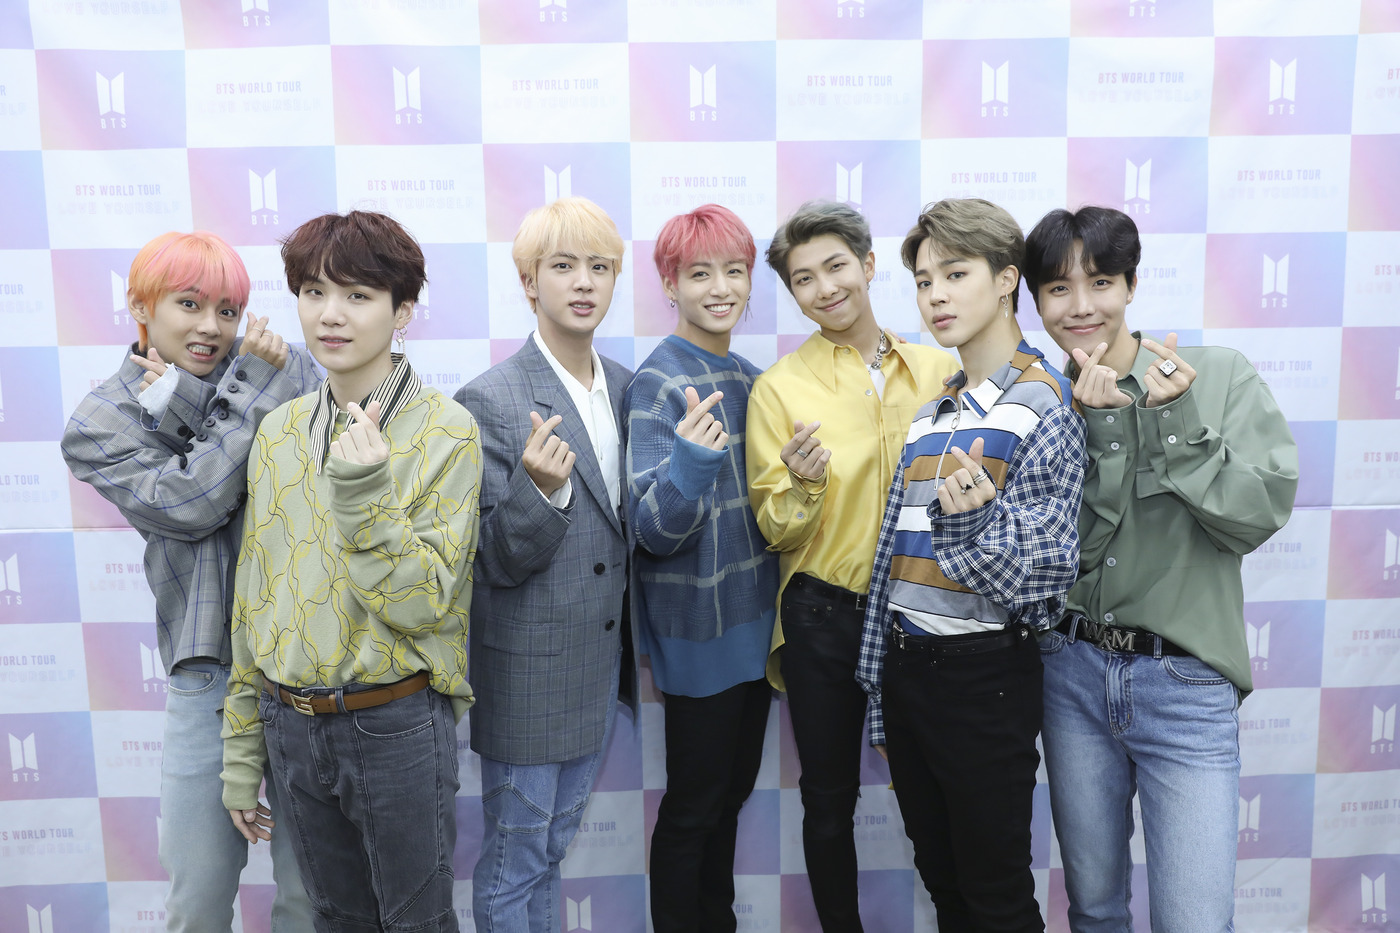 Seoul = = The song IDOL of group BTS occupies the top spot on the music charts for 10 days.BTS song IDOL is ranked # 1 in Genie including Muskelon, the largest music source site in Korea on the 2nd.In addition, it is ranked in the top three in Soribada, Mnet, and fifth in the Bucks, which proved its firepower by taking the top spot on all music charts shortly after its release on the 24th of last month.The song ranked 21st on the UK Official Chart on the 31st of last month (local time), which is the 42nd highest record set by Fake Love.The British official chart was the first K-pop group to enter the top 40 and make a new history.In addition, the music video of IDOL exceeded 100 million views in 23 hours on the 4th day of its release, and it recorded its own record, and it was named as the top of the iTunes Top Song chart of the previous World 66 regions shortly after its release.IDOL is a big interest in the world, confirming the status of BTS, including World pop star Nicki Minaj participating in the feature.